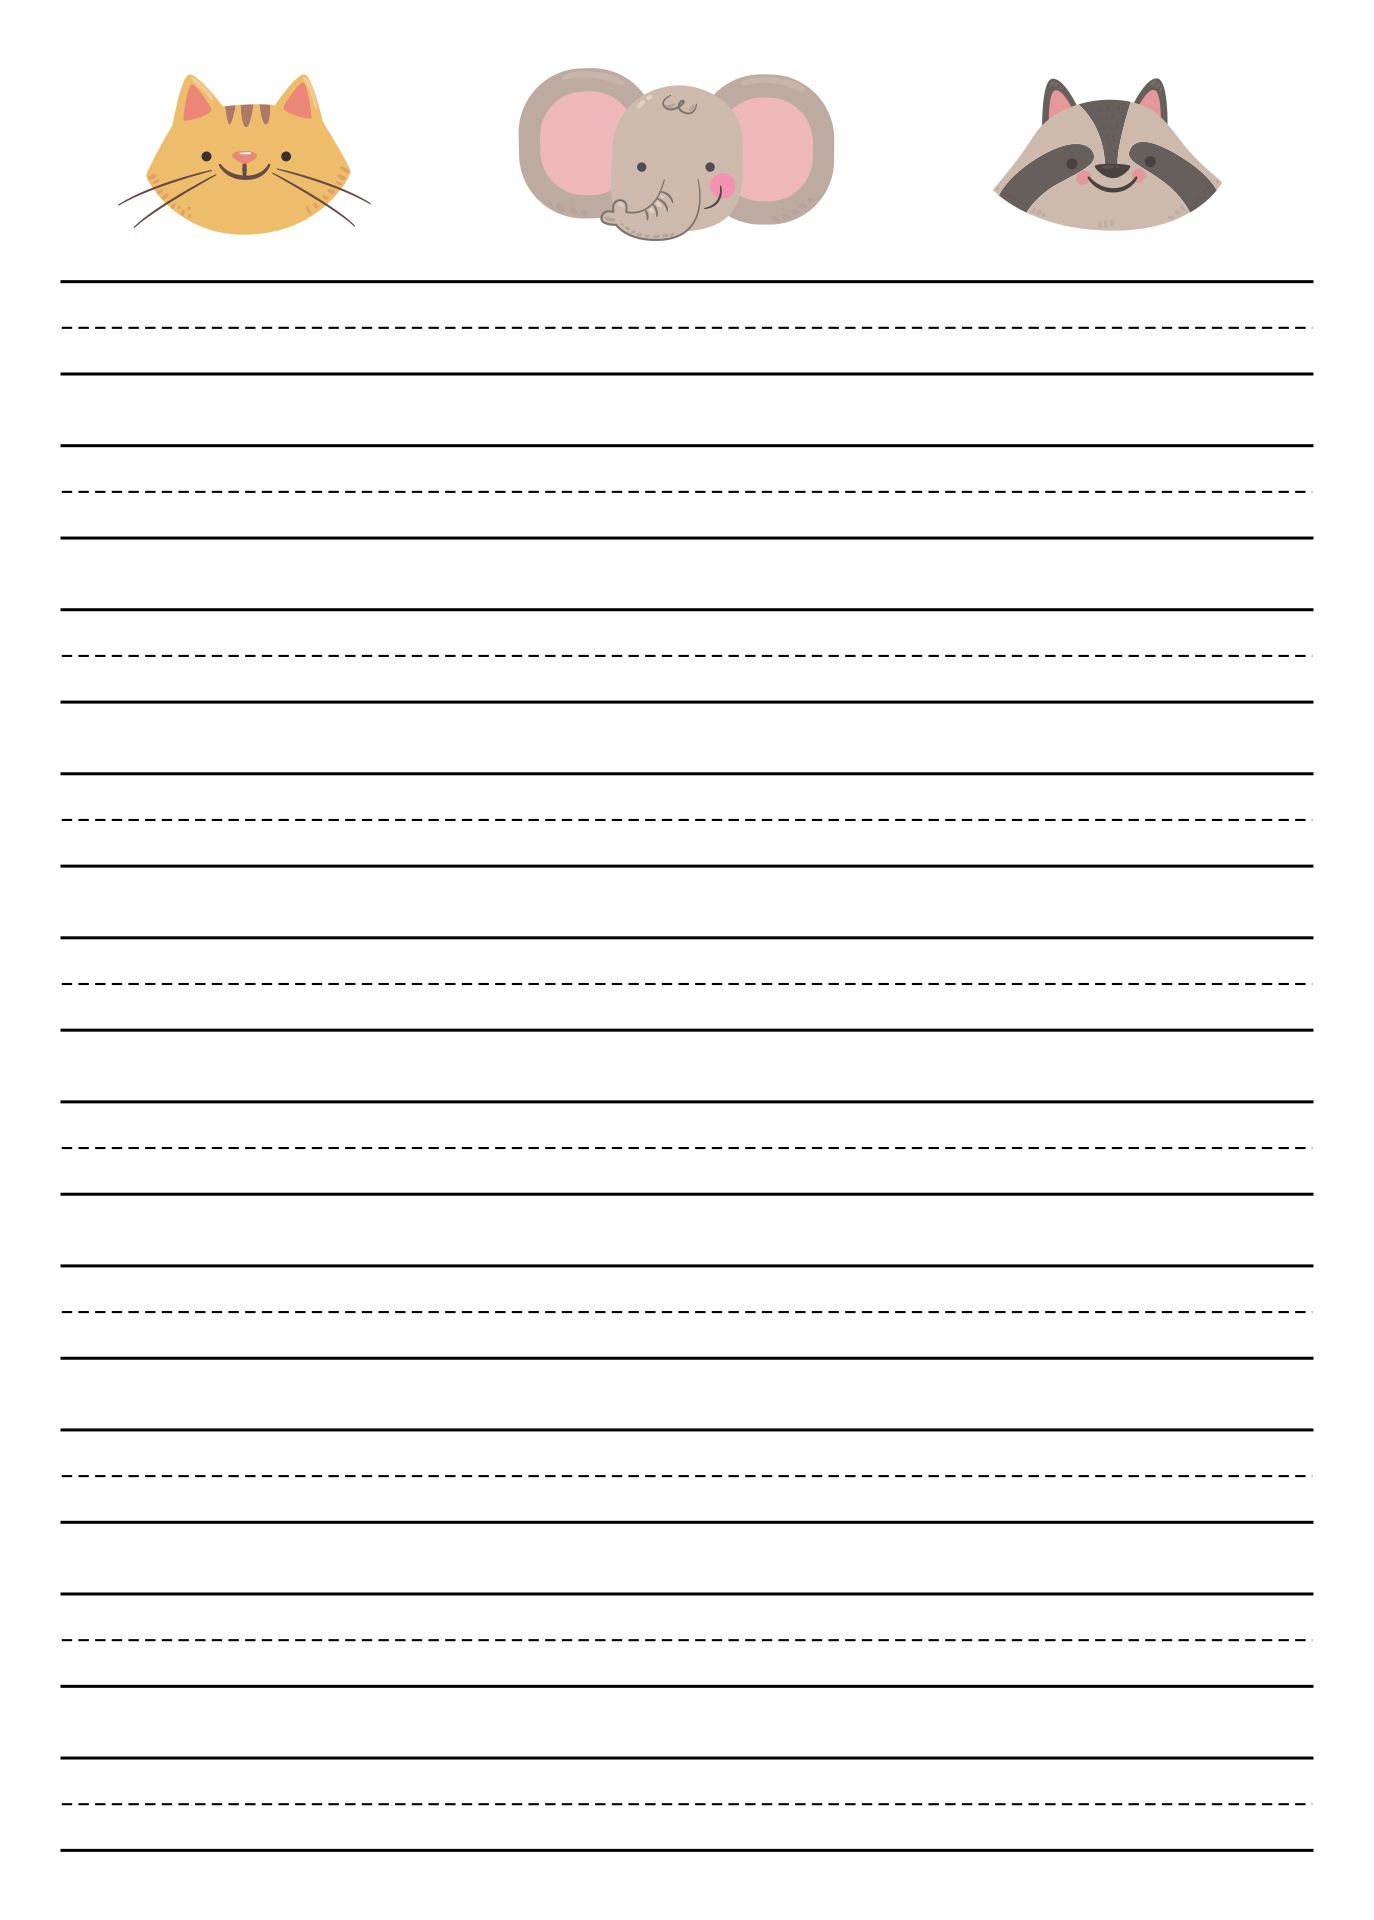 Handwriting Lined Paper Printable